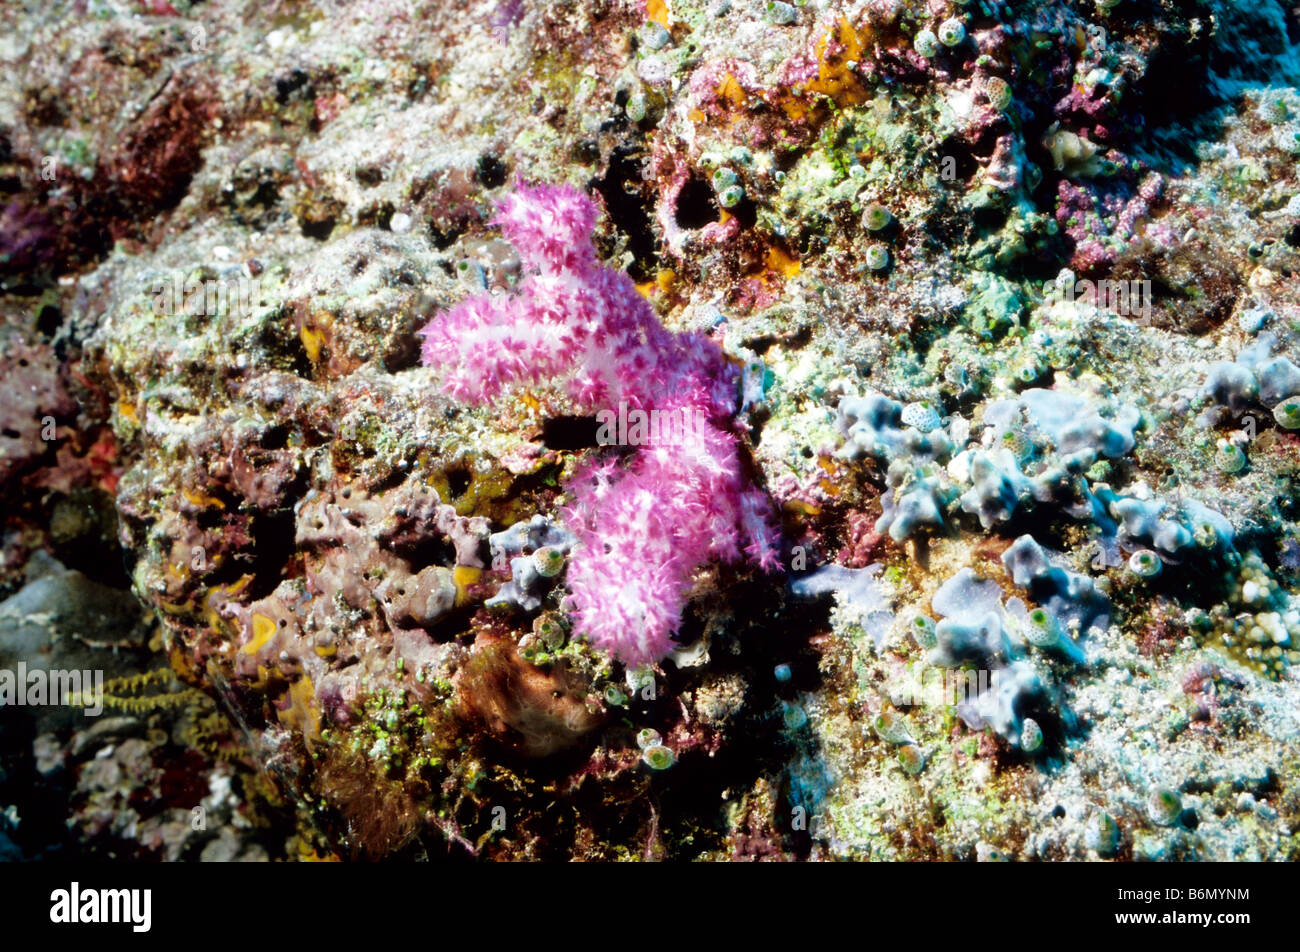 Magenta Spiky Soft Coral. Alcyonaria. Soft Corals. Nephtheidae. Dendronephthya. Amazing underwater marine life of the Maldives. Stock Photo